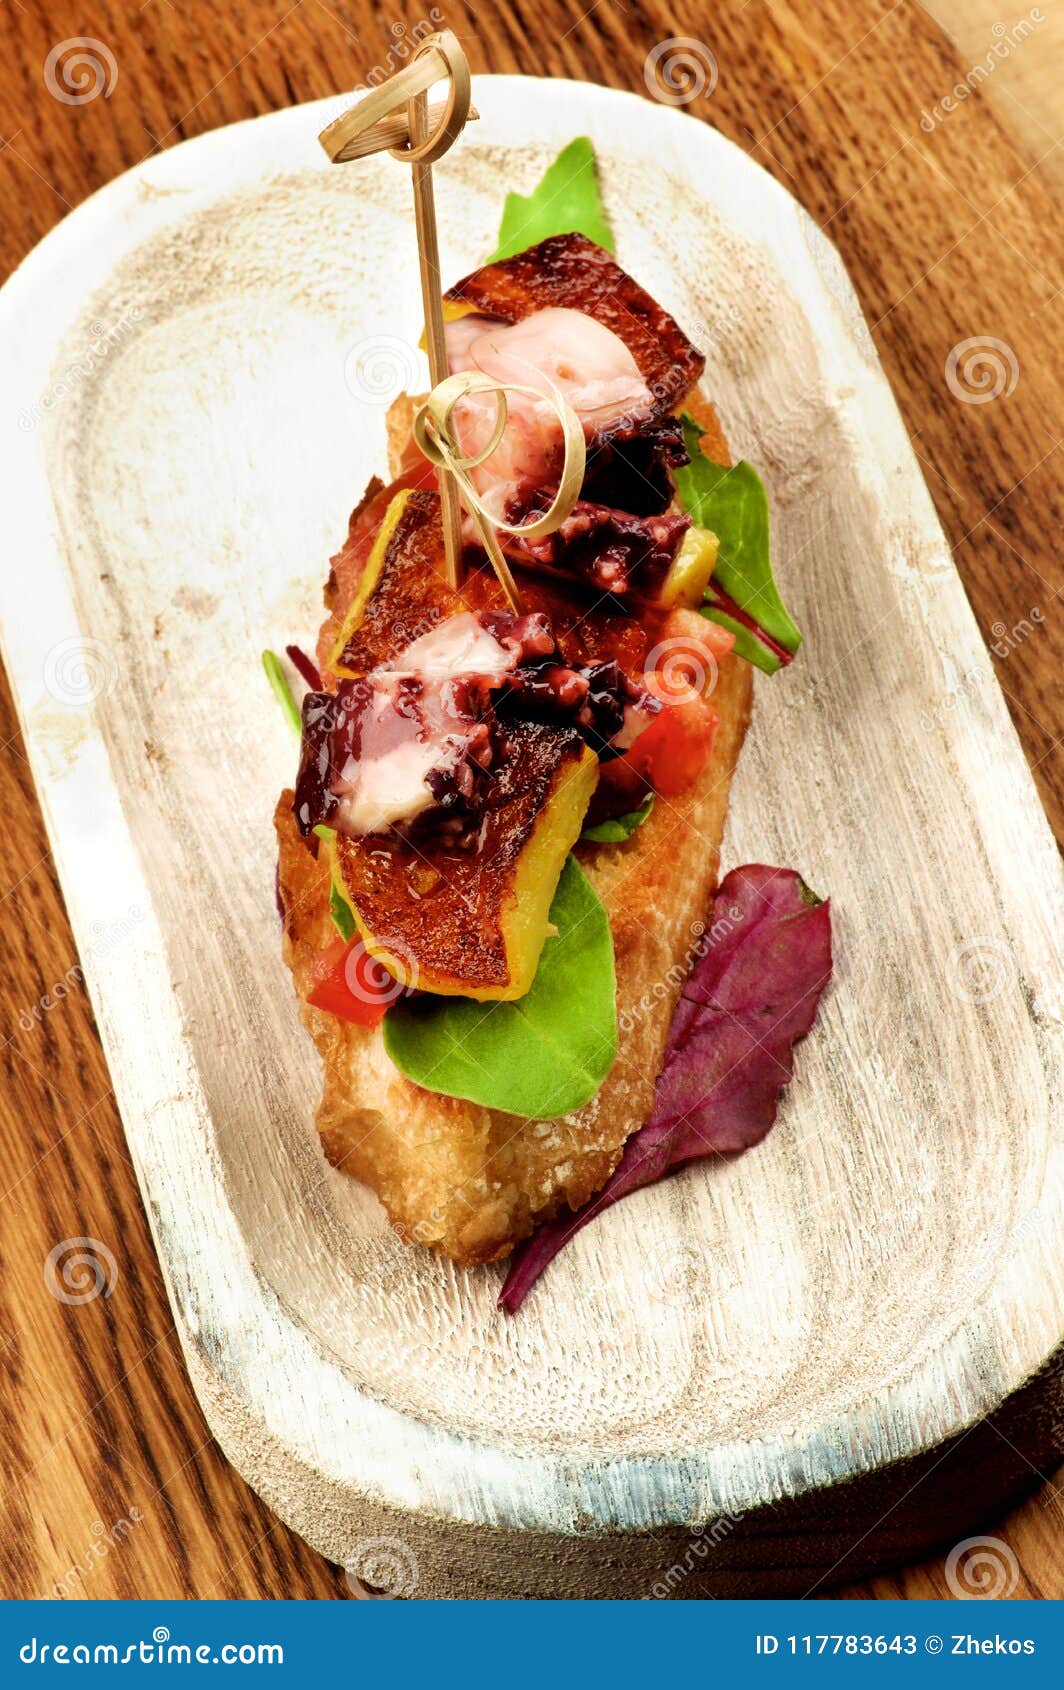 Octopus Spanish Tapas stock image. Image of colorful - 117783643